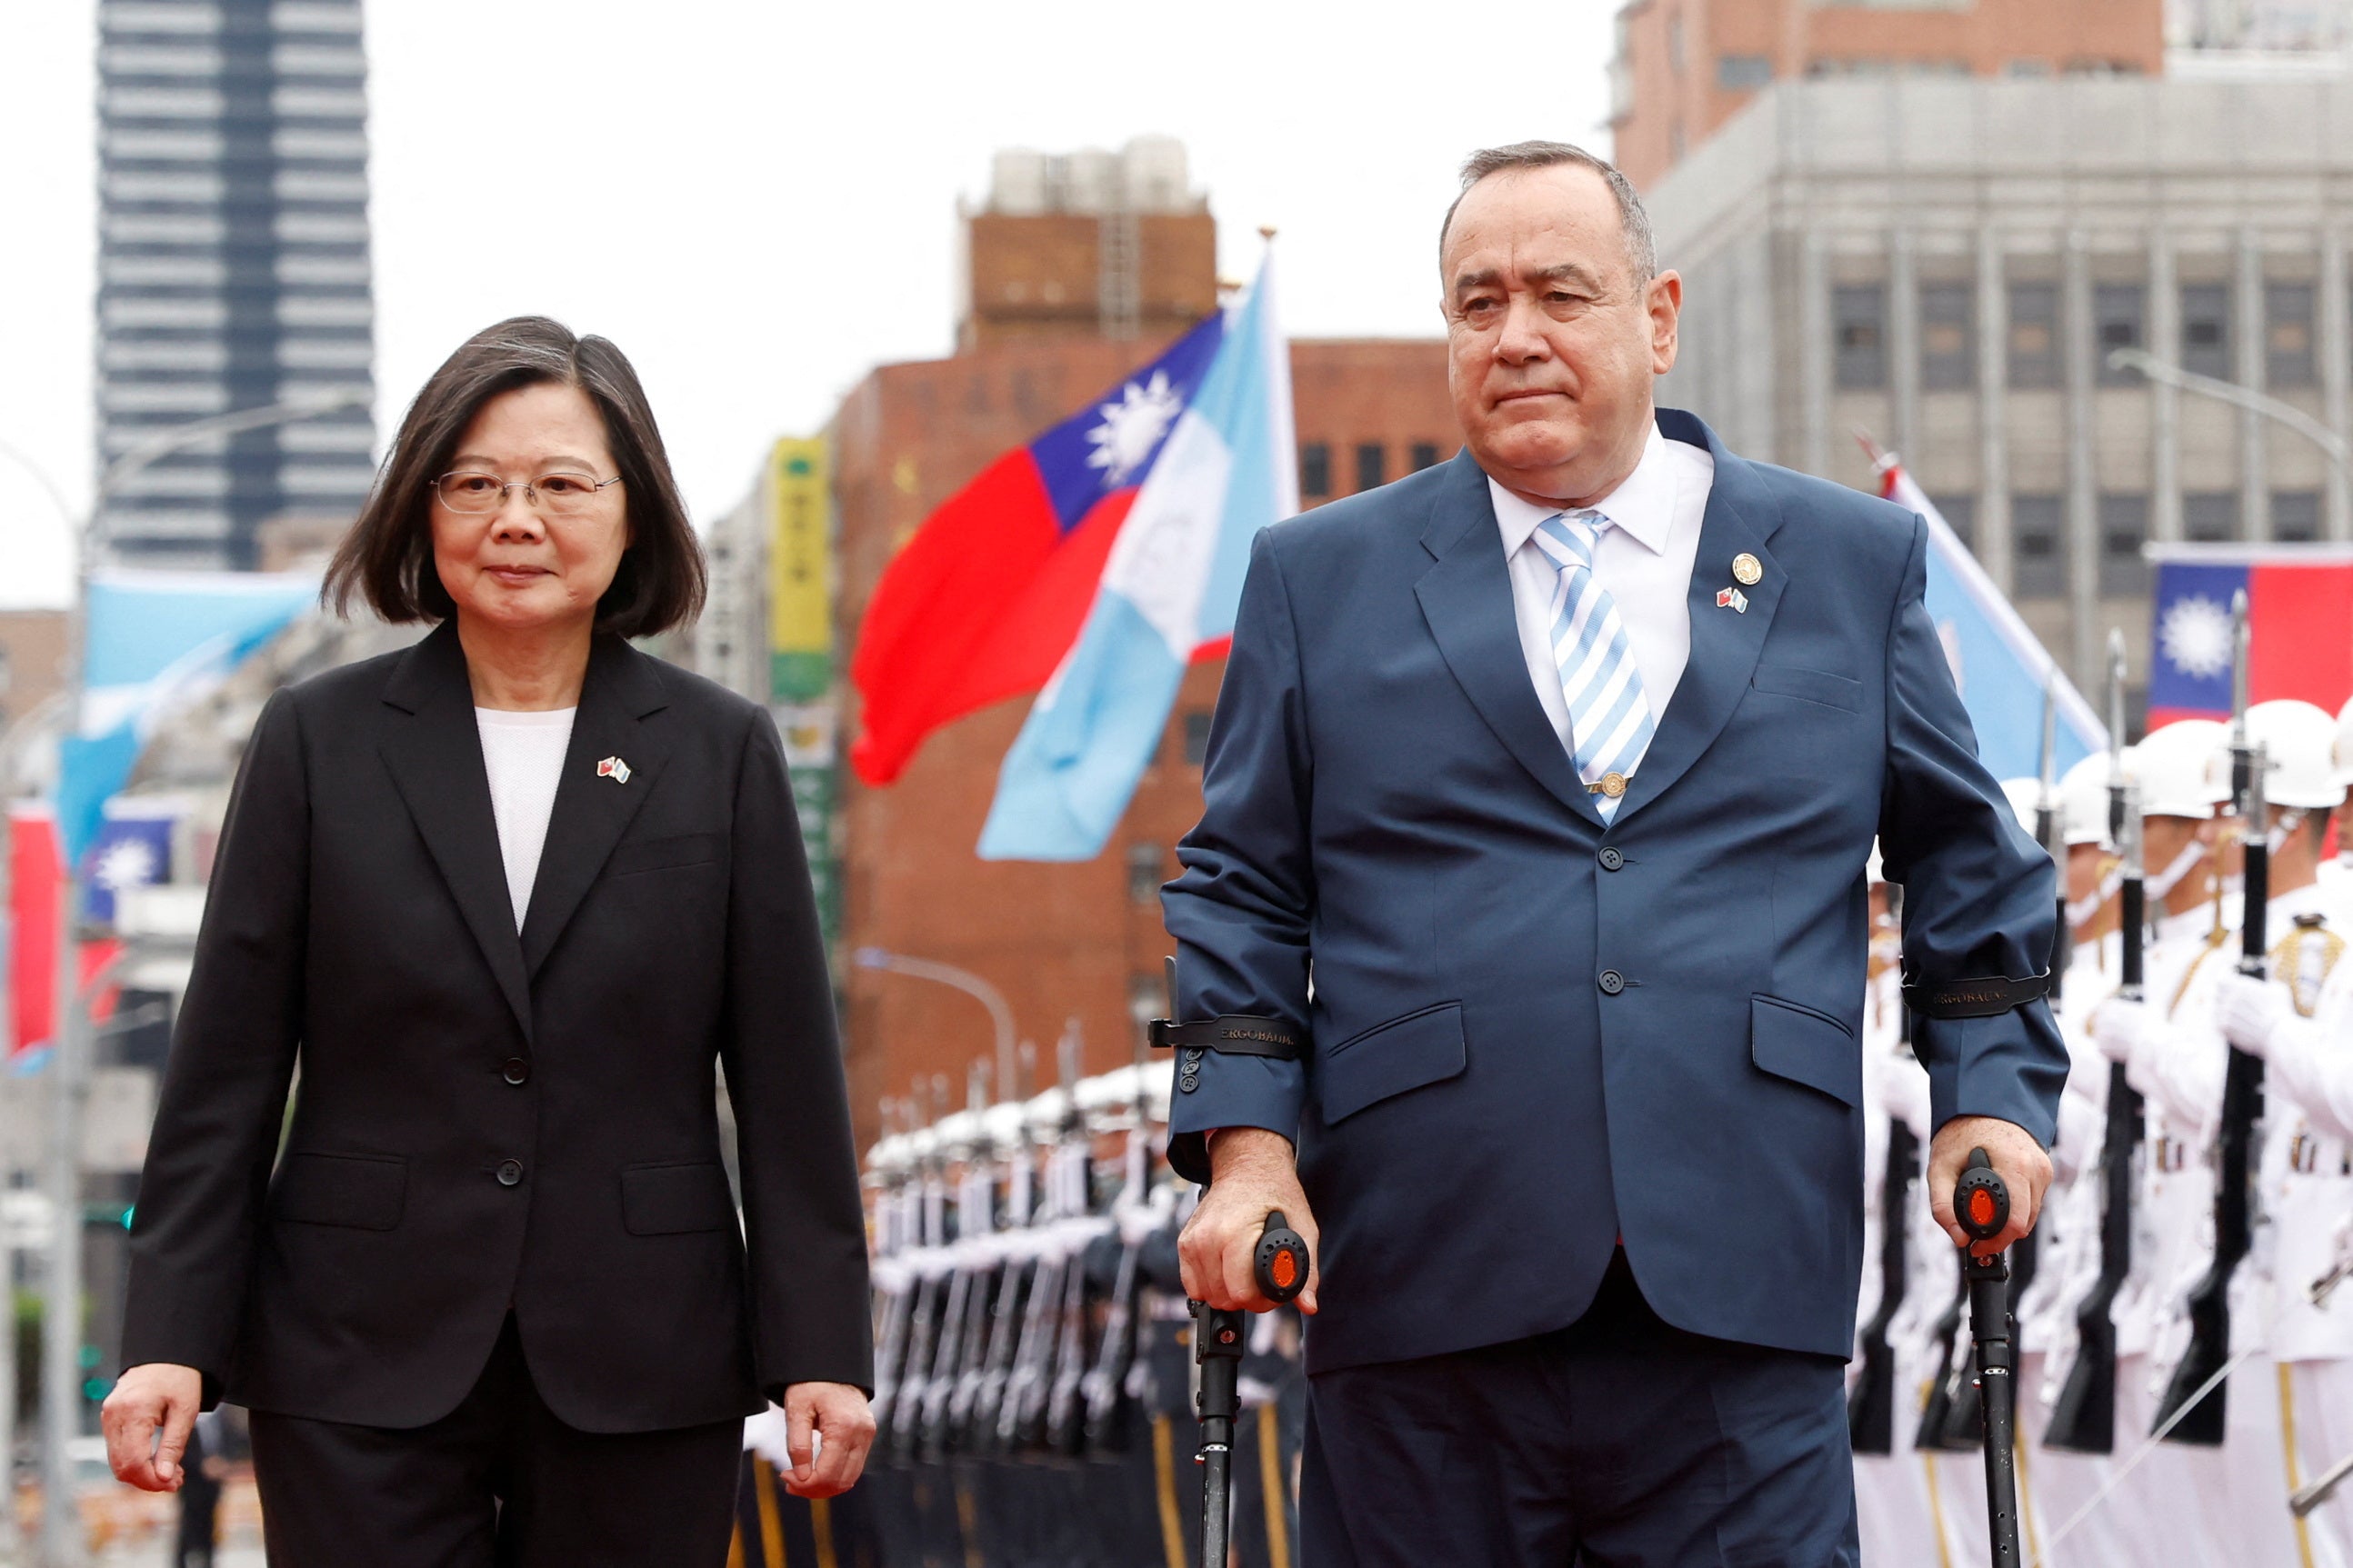 Guatemala president pledges strong support for “Republic of Taiwan”